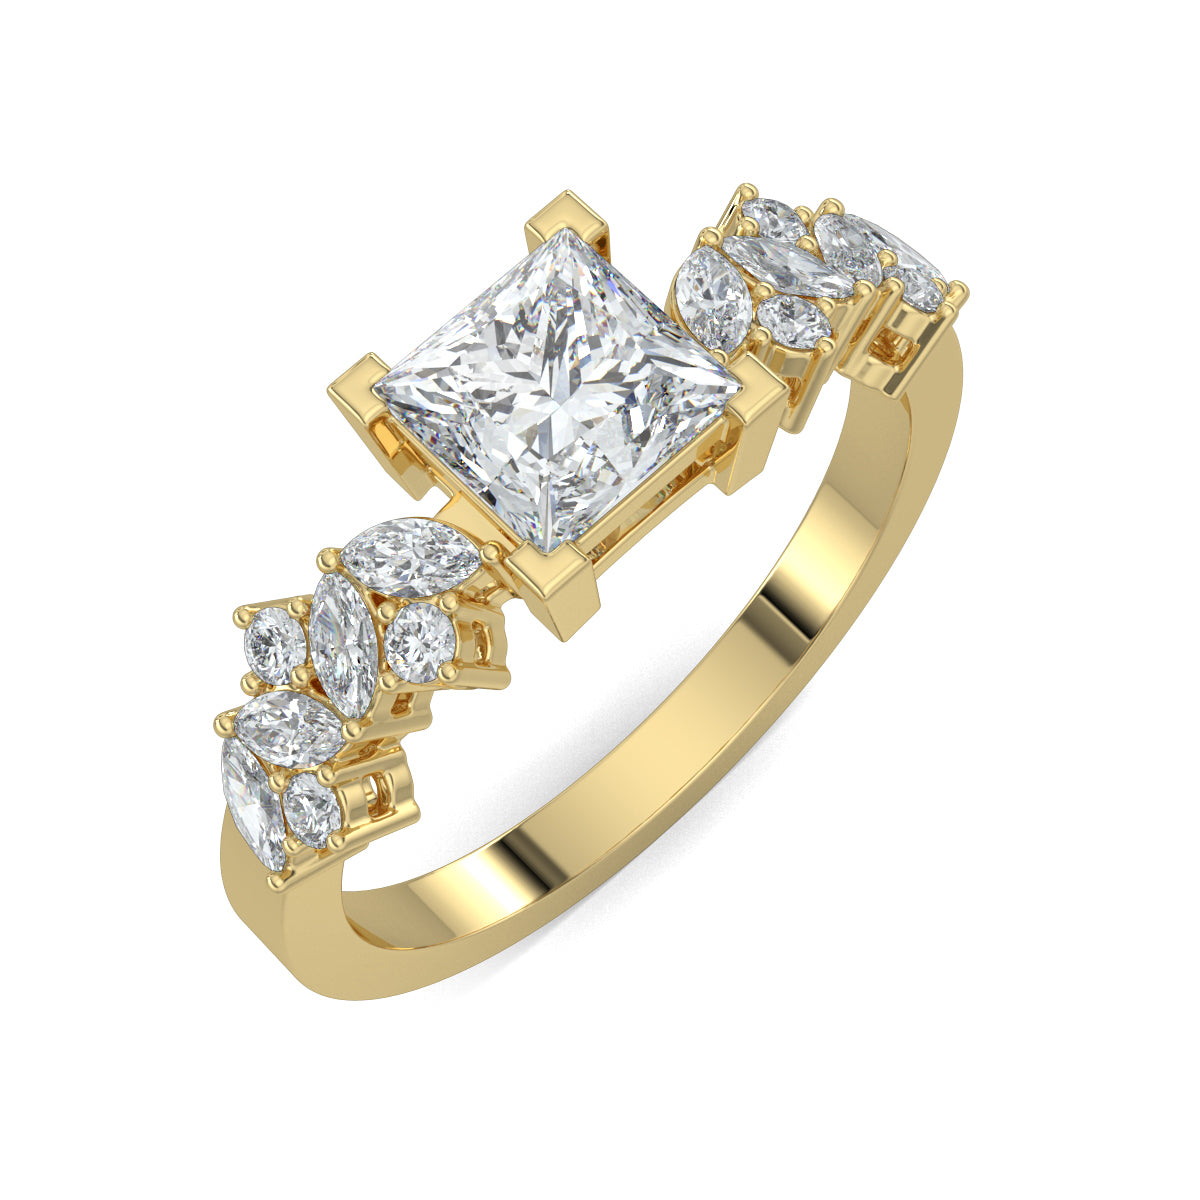 Yellow Gold, Diamond Ring, luxurious princess solitaire ring, natural diamond ring, lab-grown diamond ring, marquise and round diamond ring, solitaire engagement ring, classic diamond ring